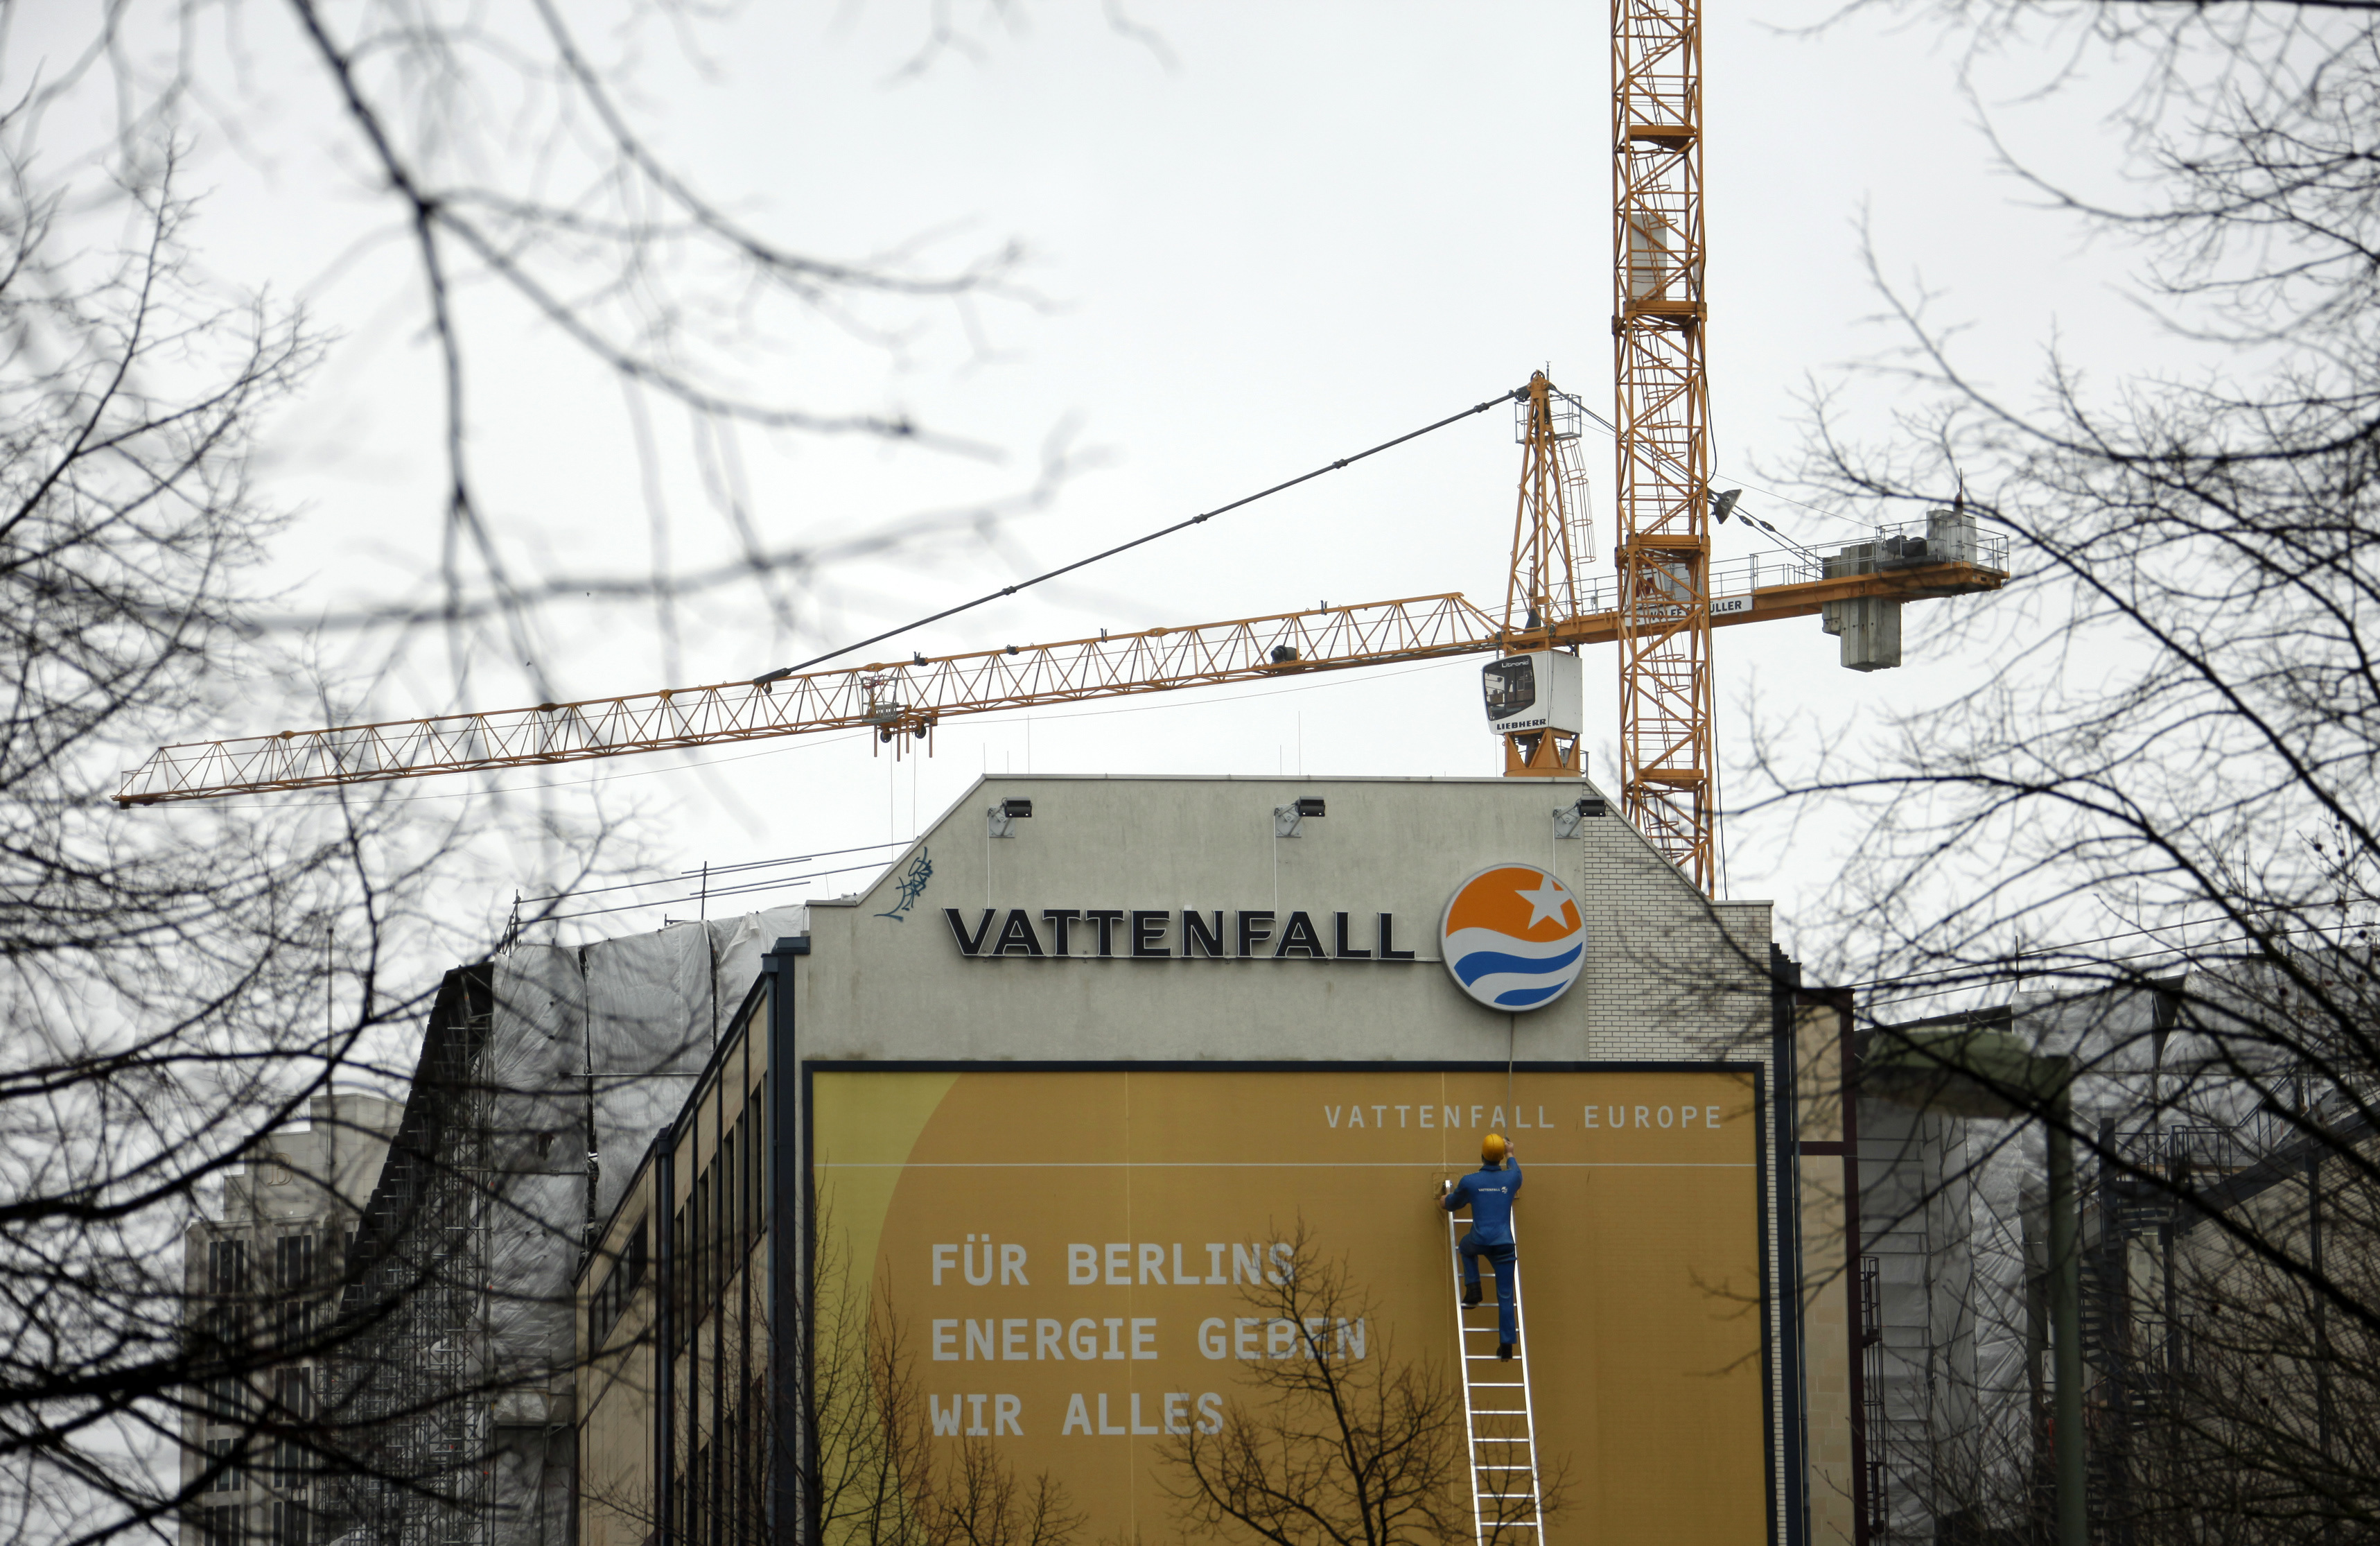 An advertisement of Vattenfall with figure of a worker on a long ladder climbing to a Vattenfall logo is pictured in Berlin